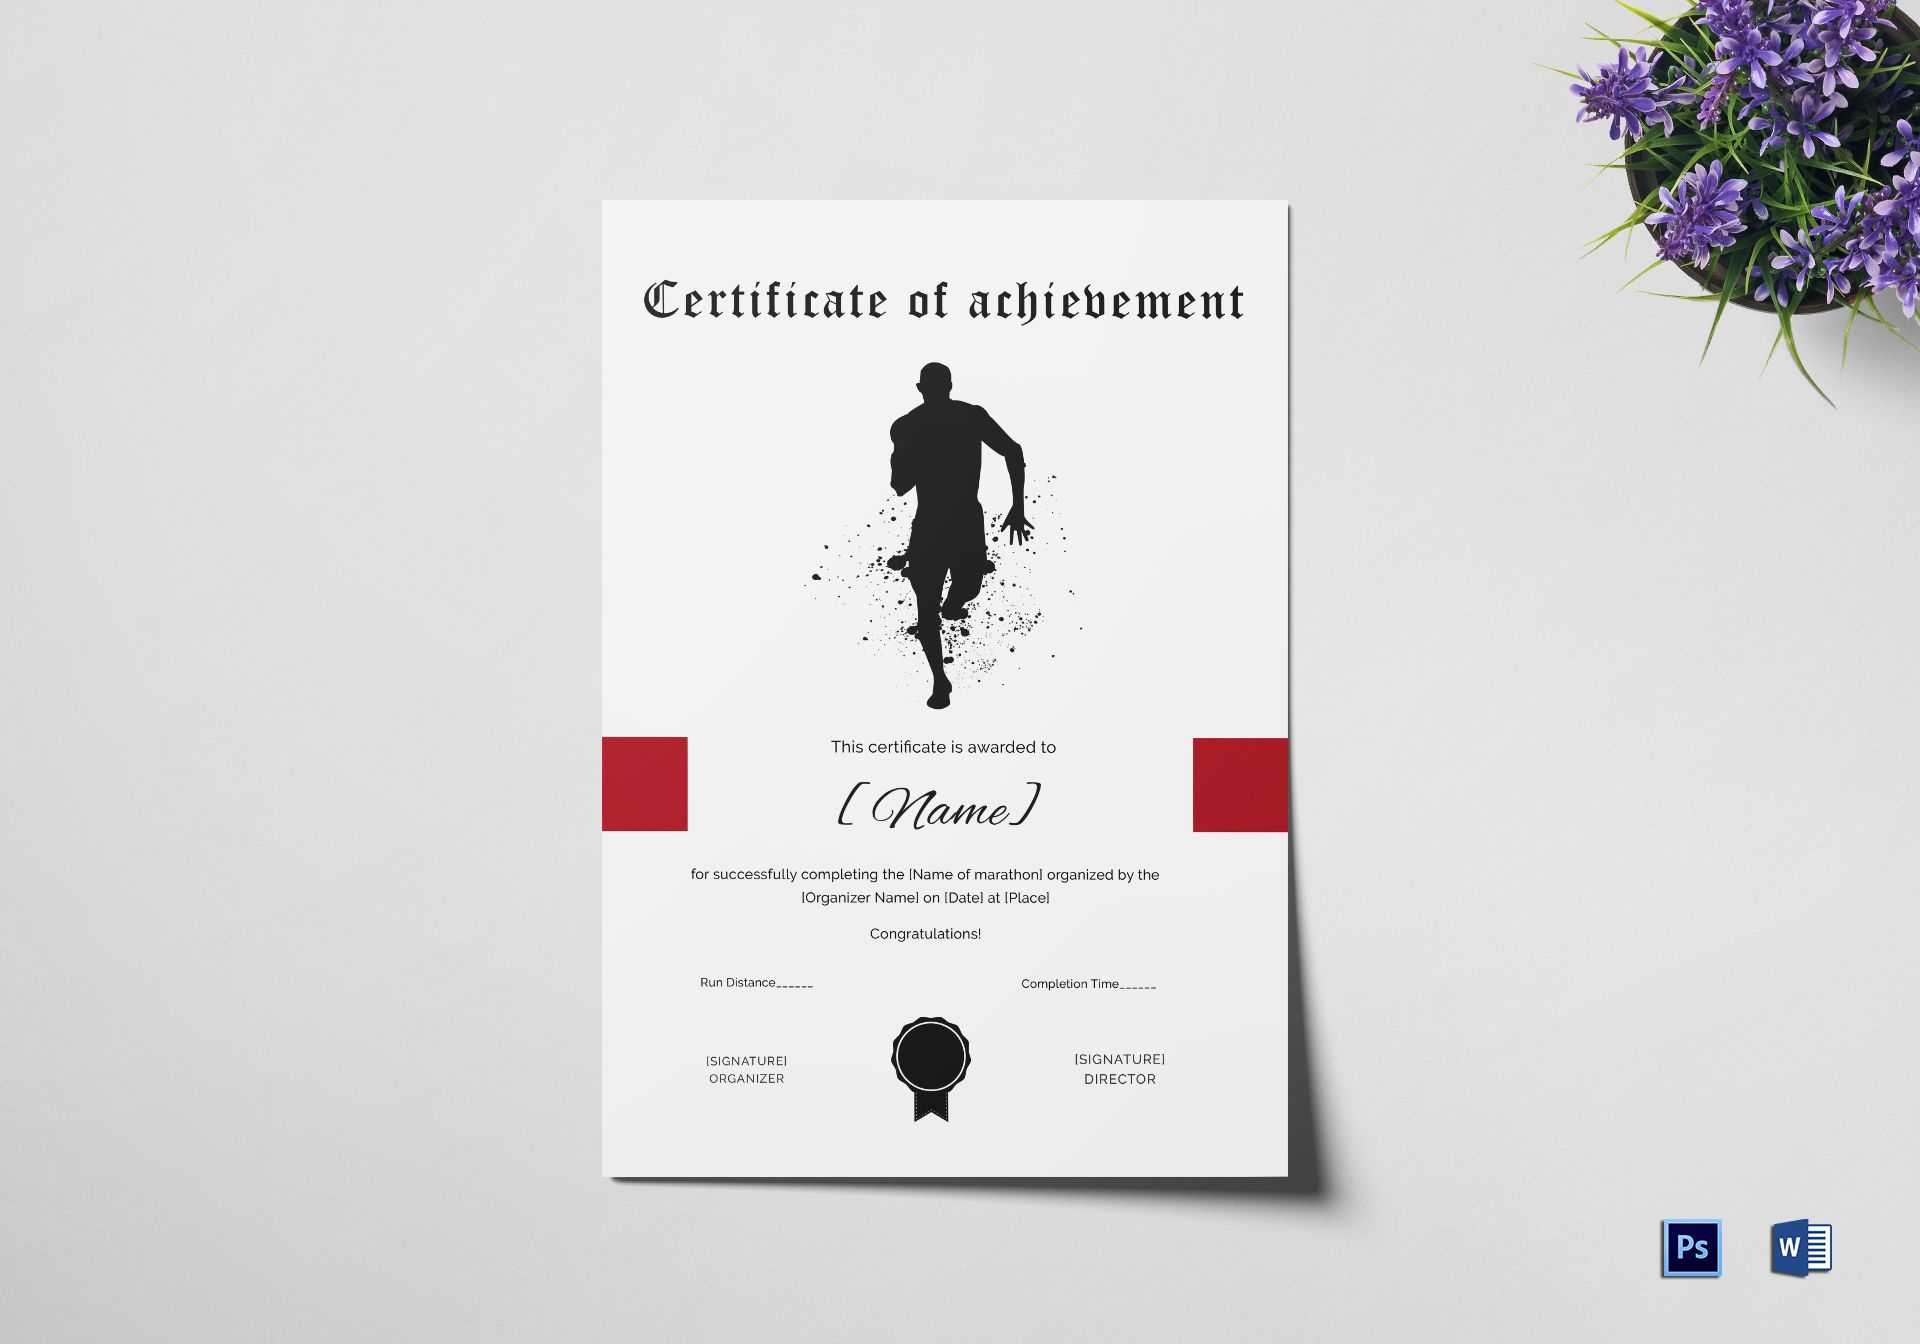 Certificate Of Achievement For Running Template With Regard To Walking Certificate Templates